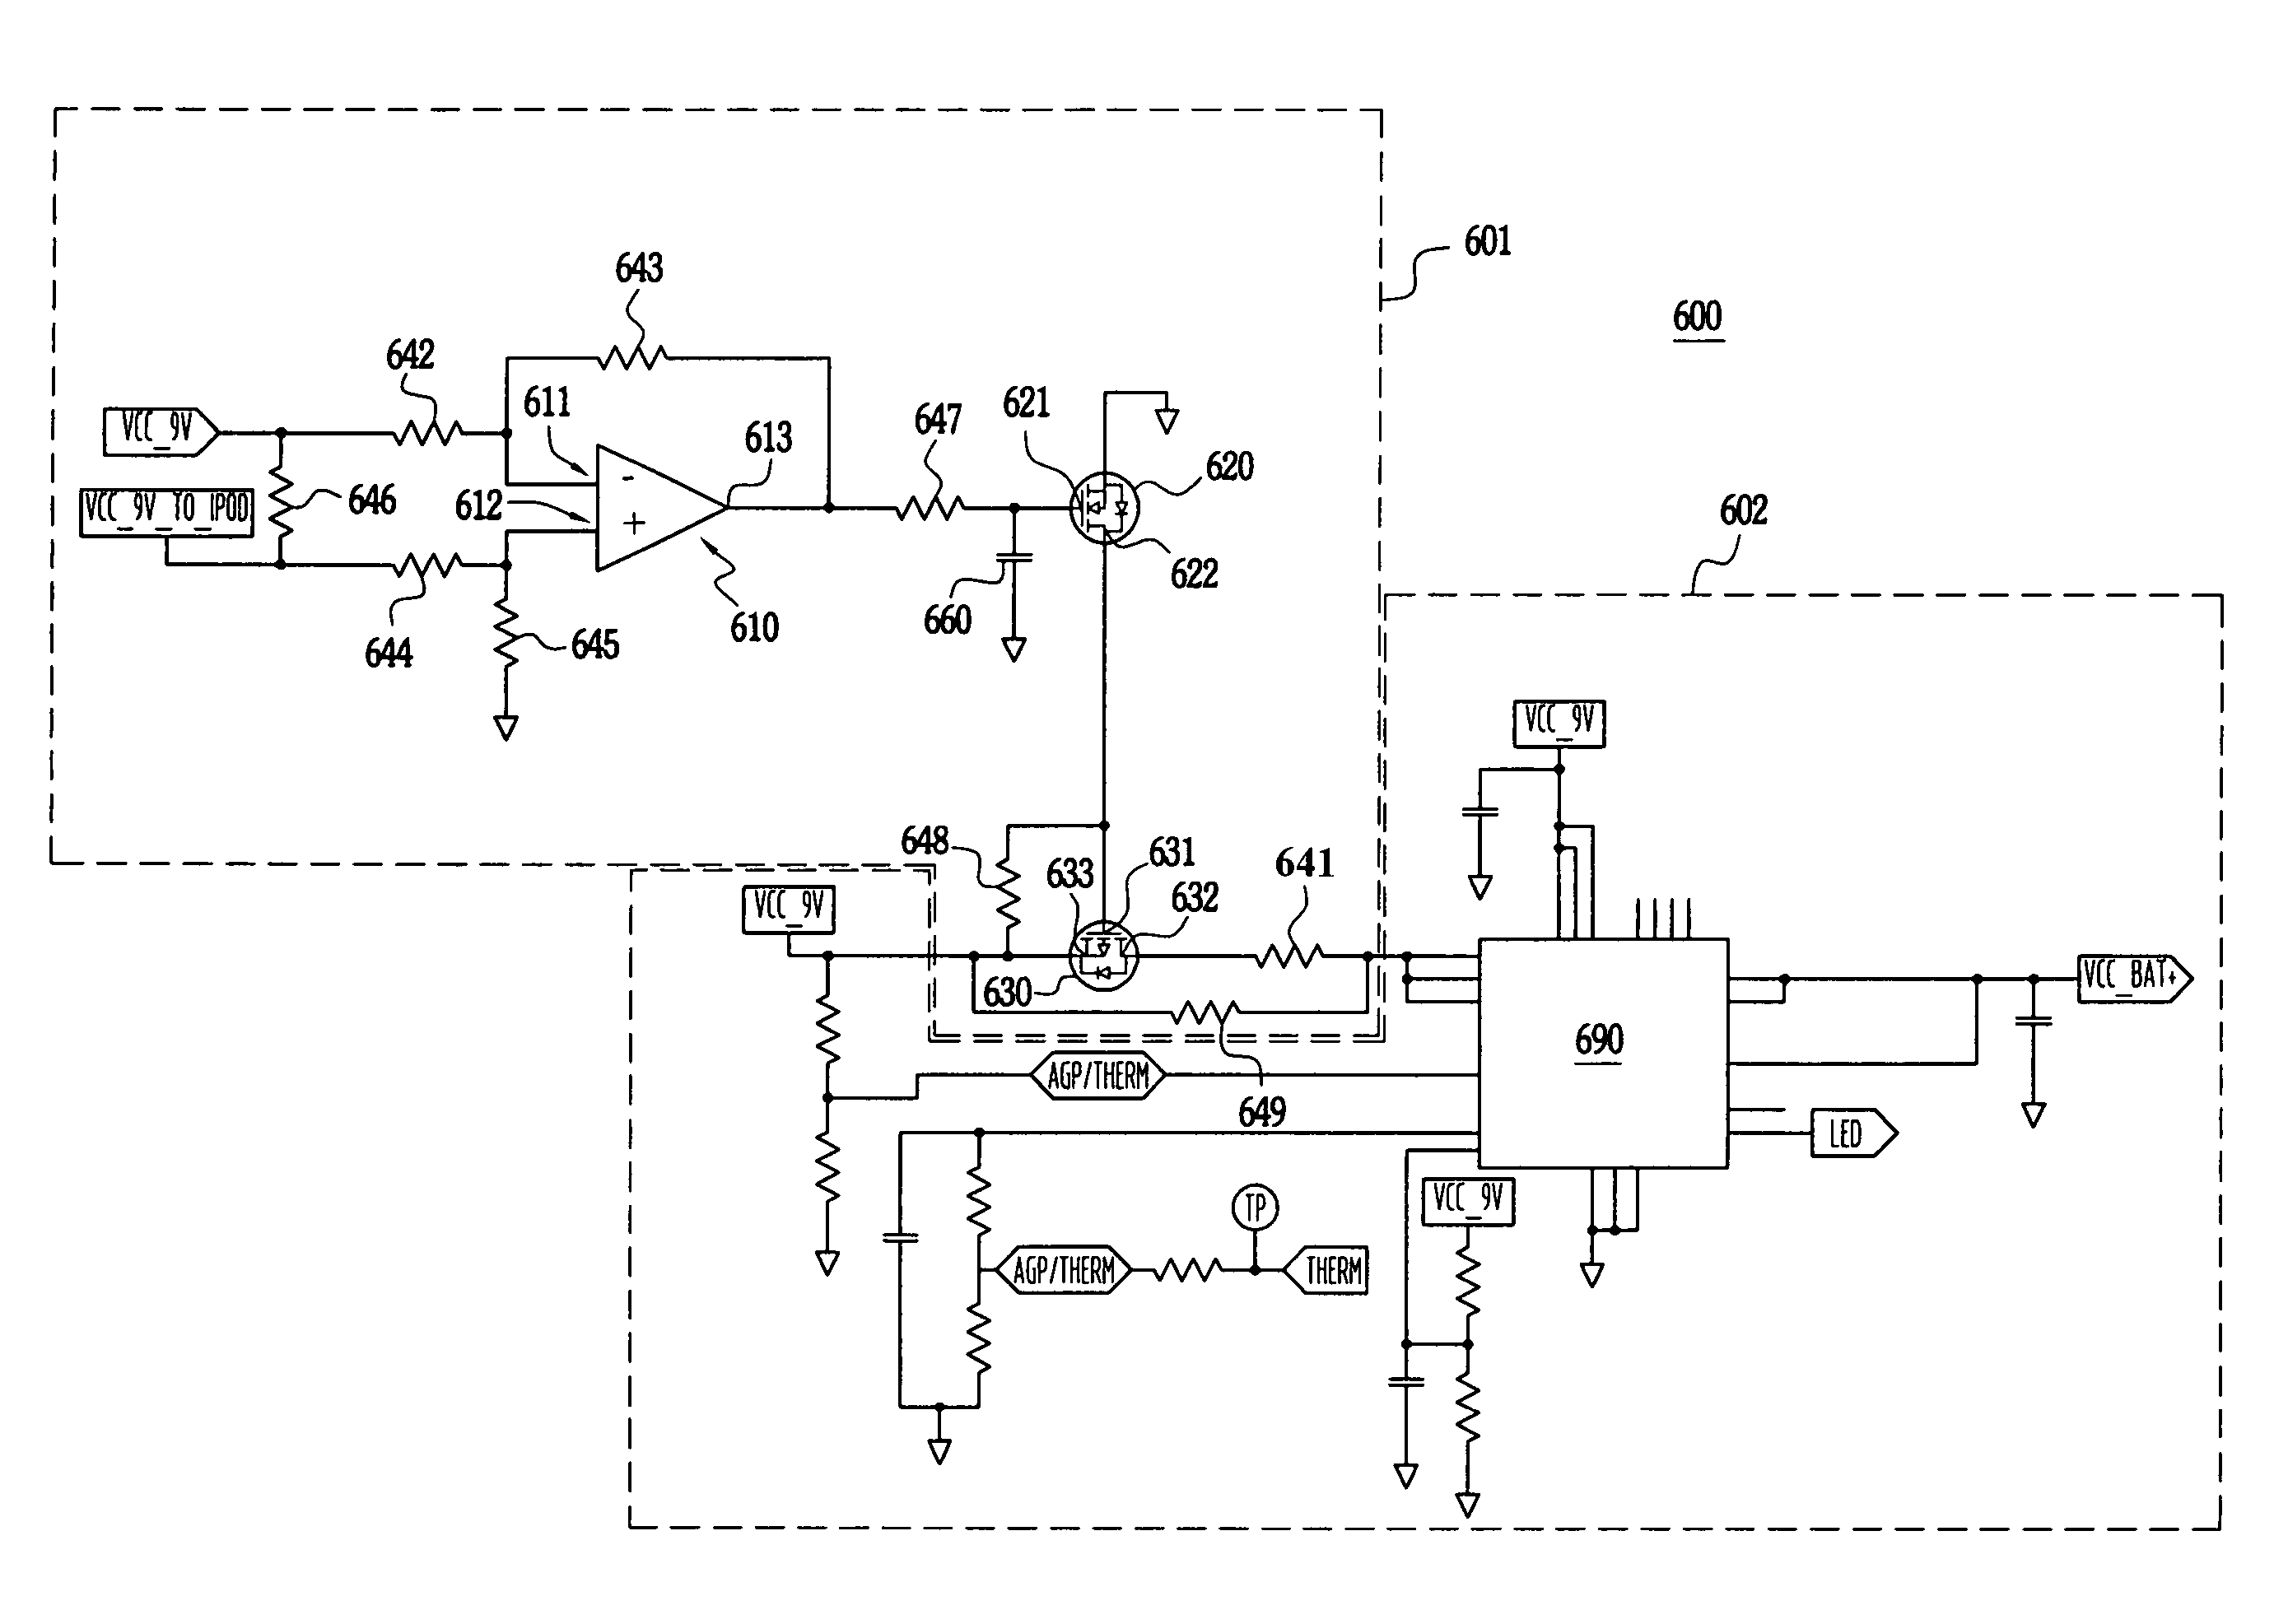 Power supply system comprising rechargeable battery pack and attachment apparatus